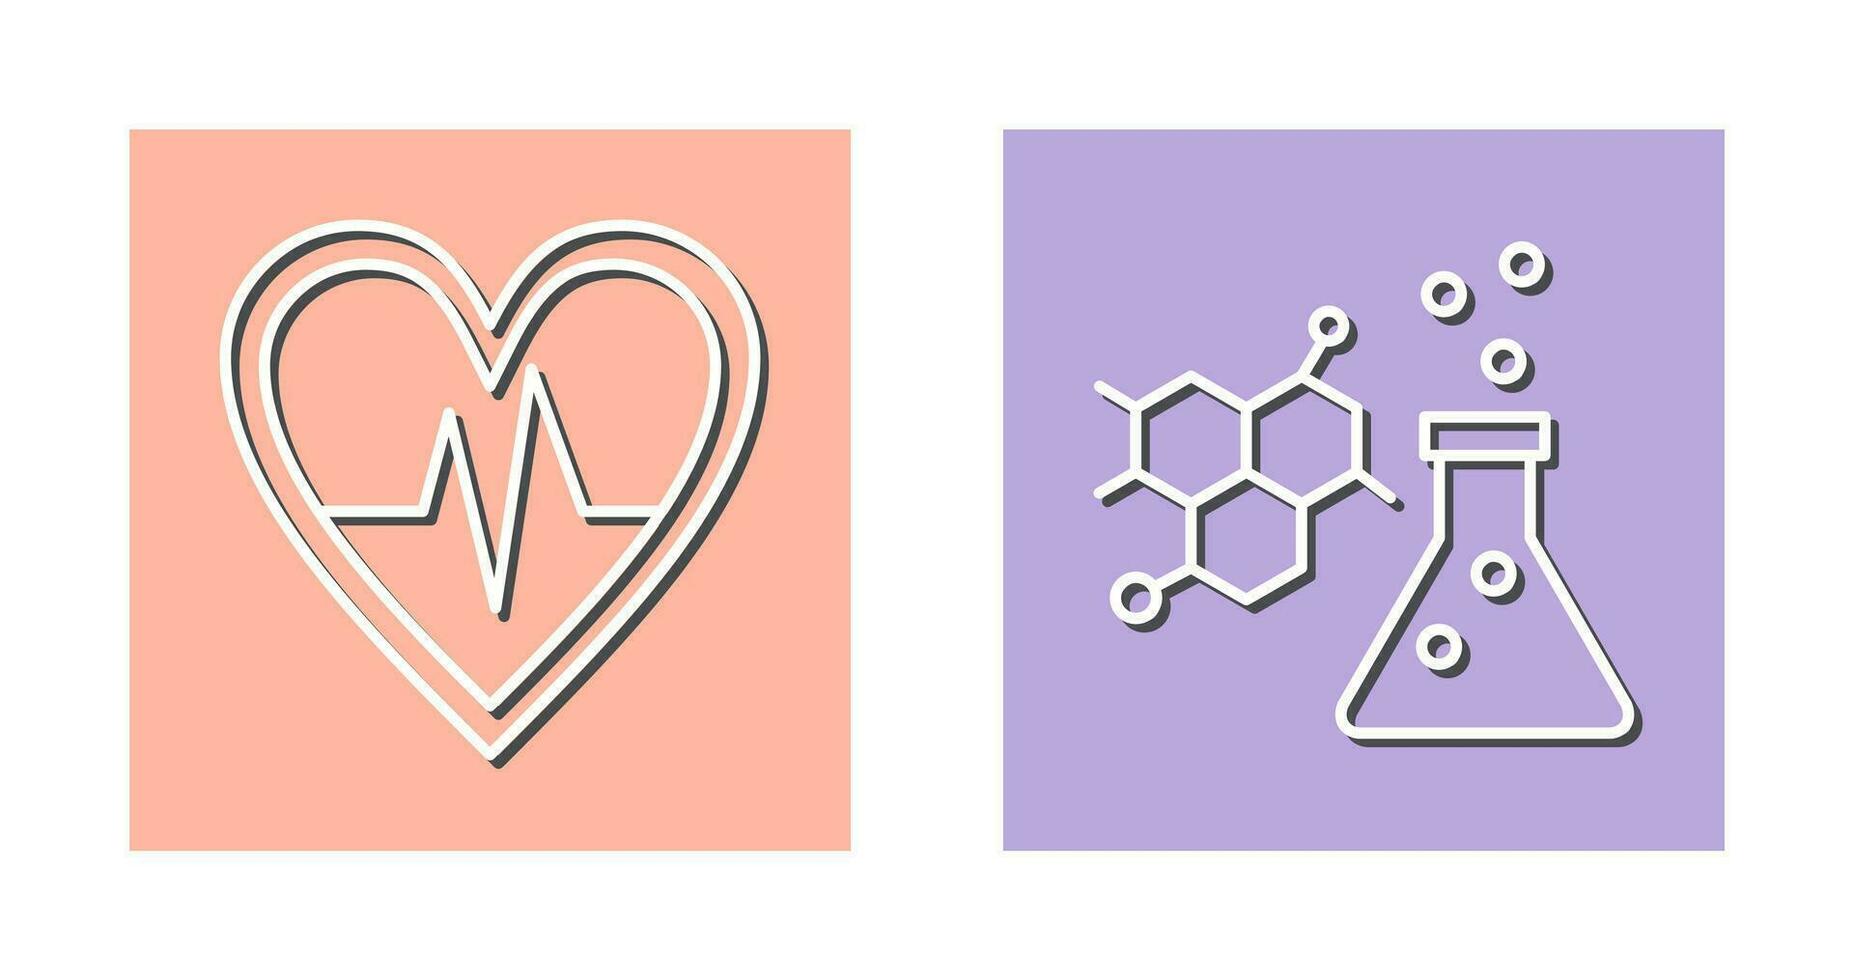 Cardiogram and Chemistry Icon vector